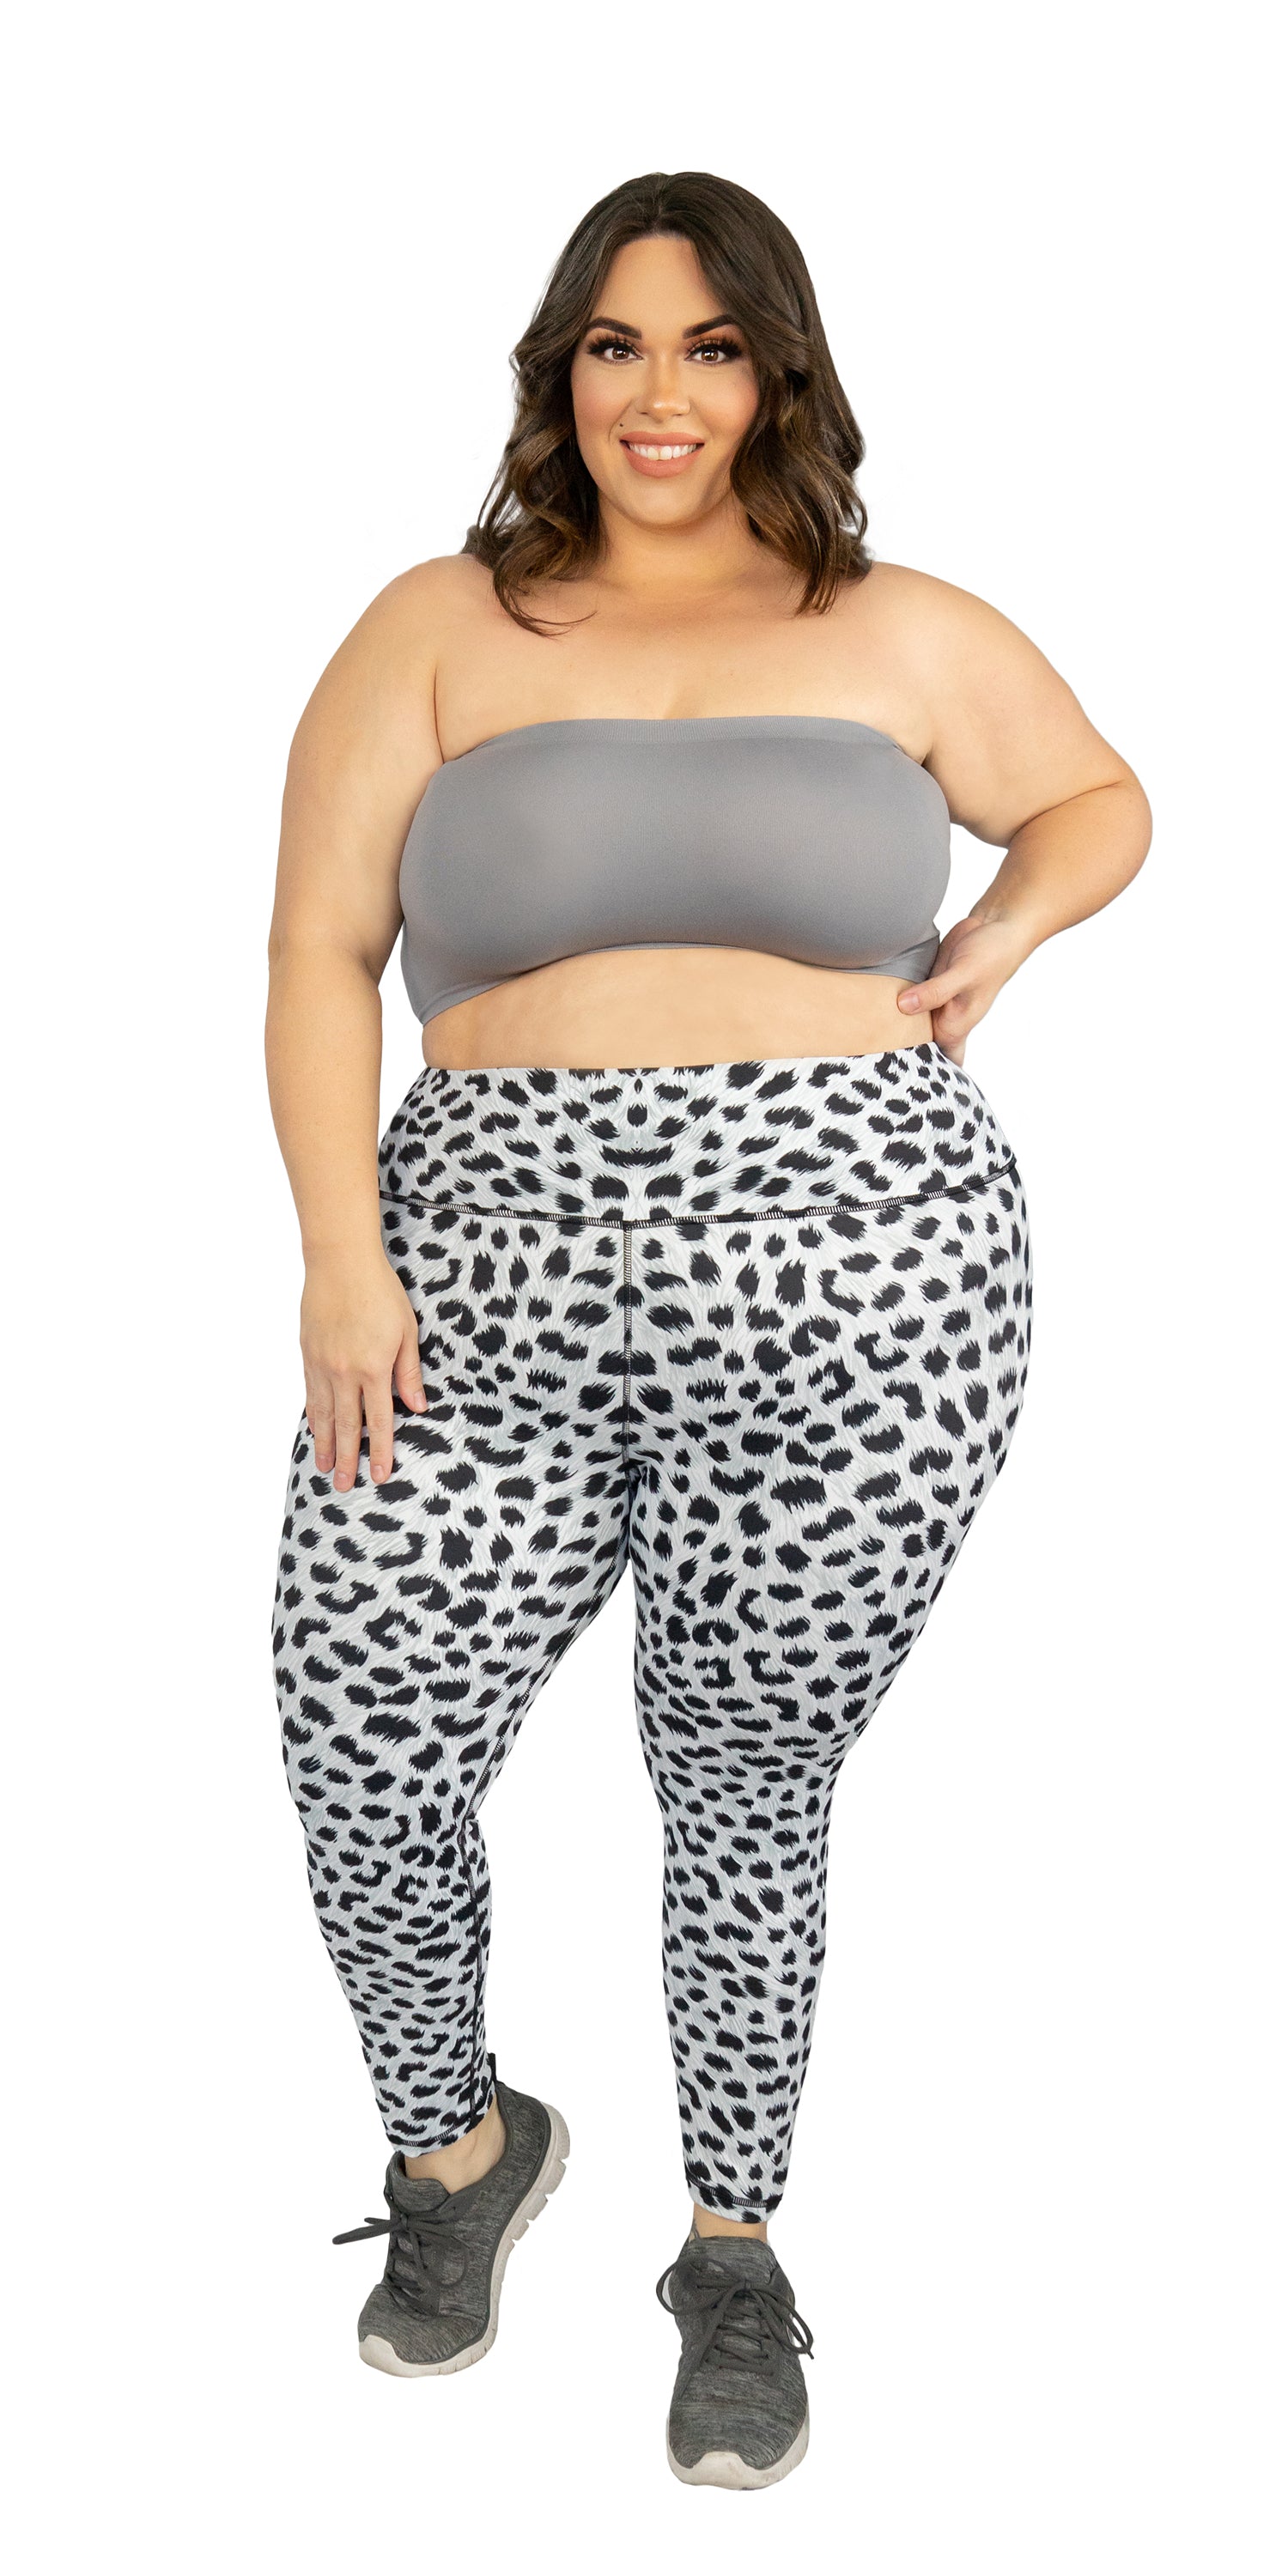 Buttery Smooth Snow Leopard Extra Plus Size Leggings - 3X-5X